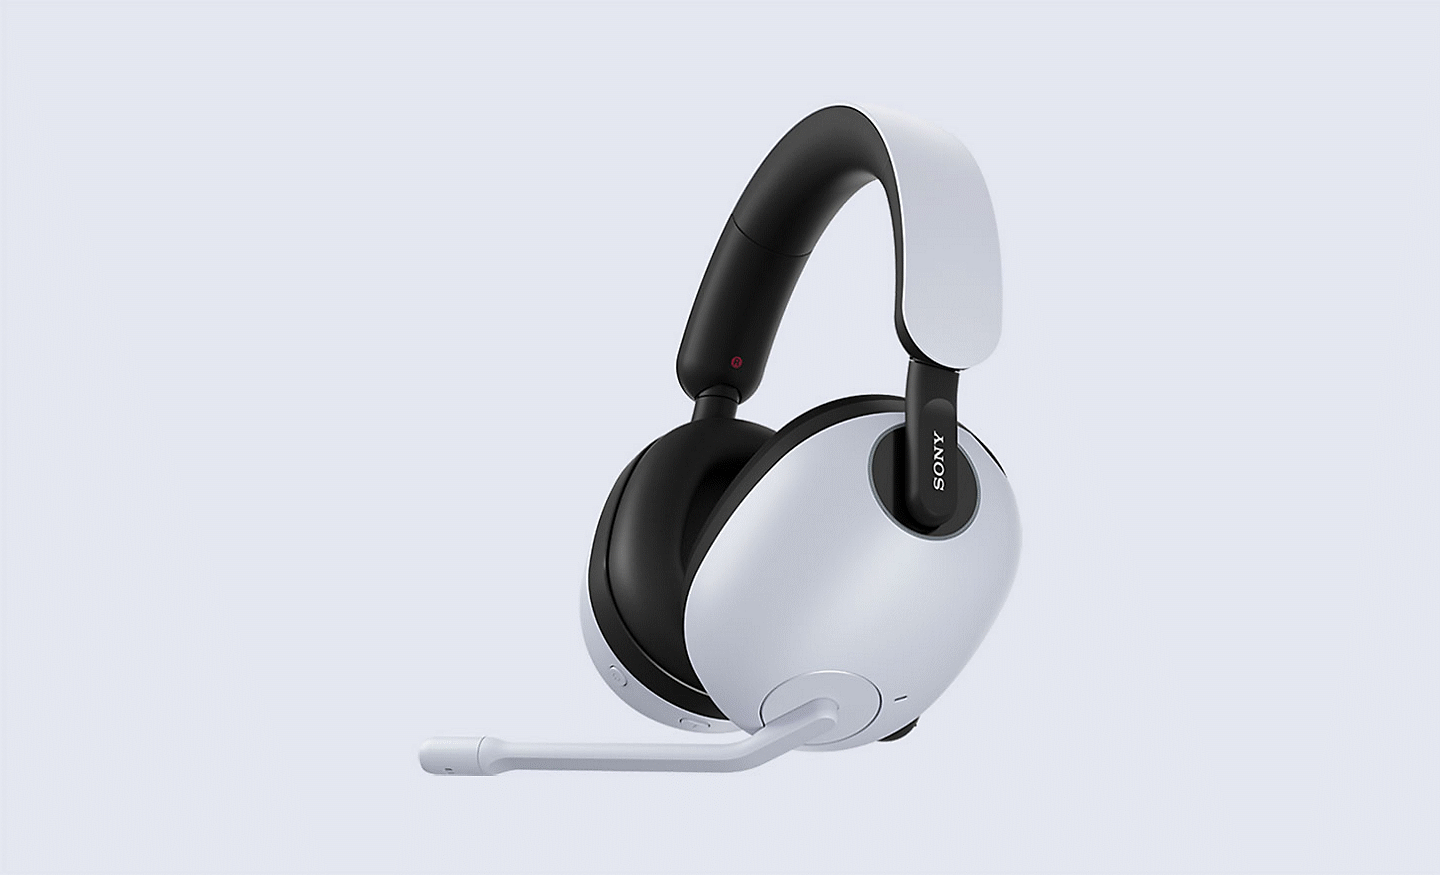 Image of the INZONE H9 gaming headset